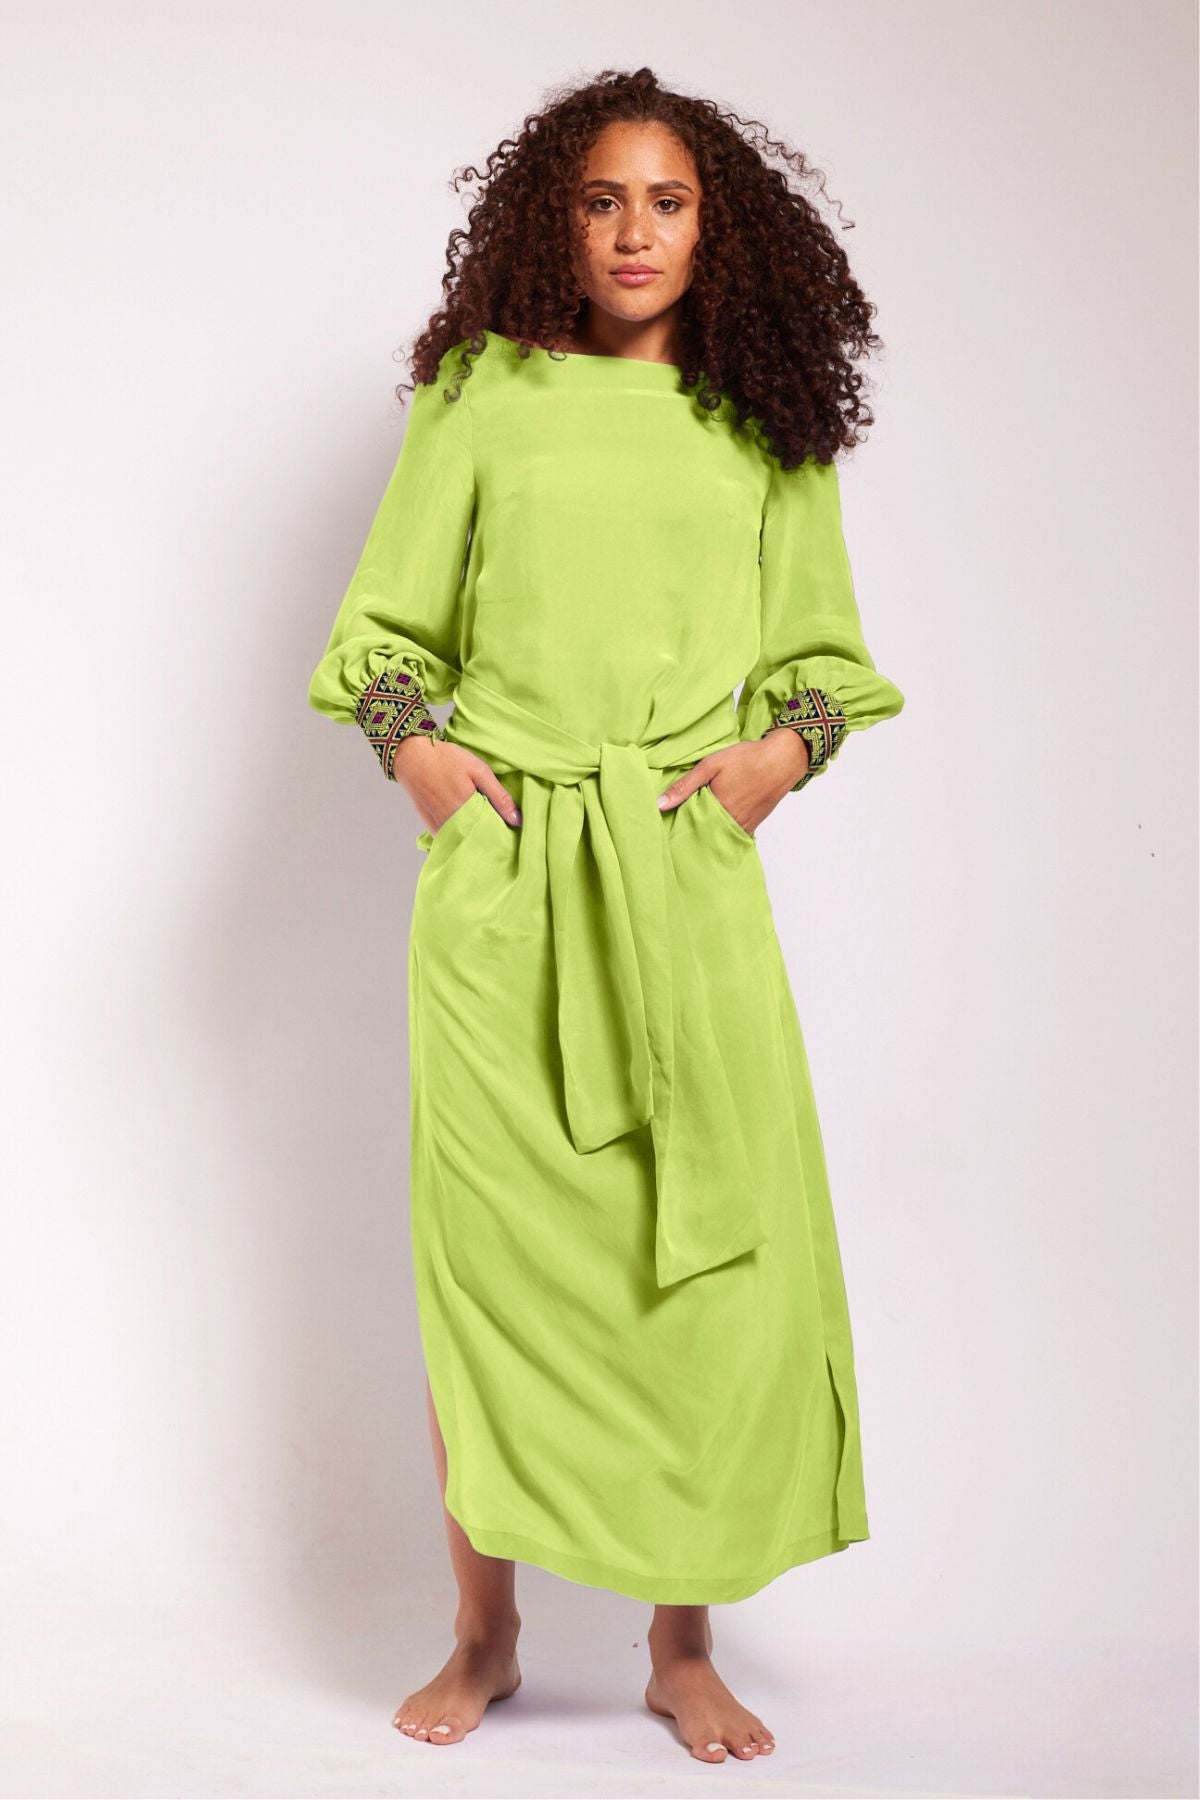 woman modelling a bright yellow kaftan duster with embroidered sleeves made from recycled materials 8